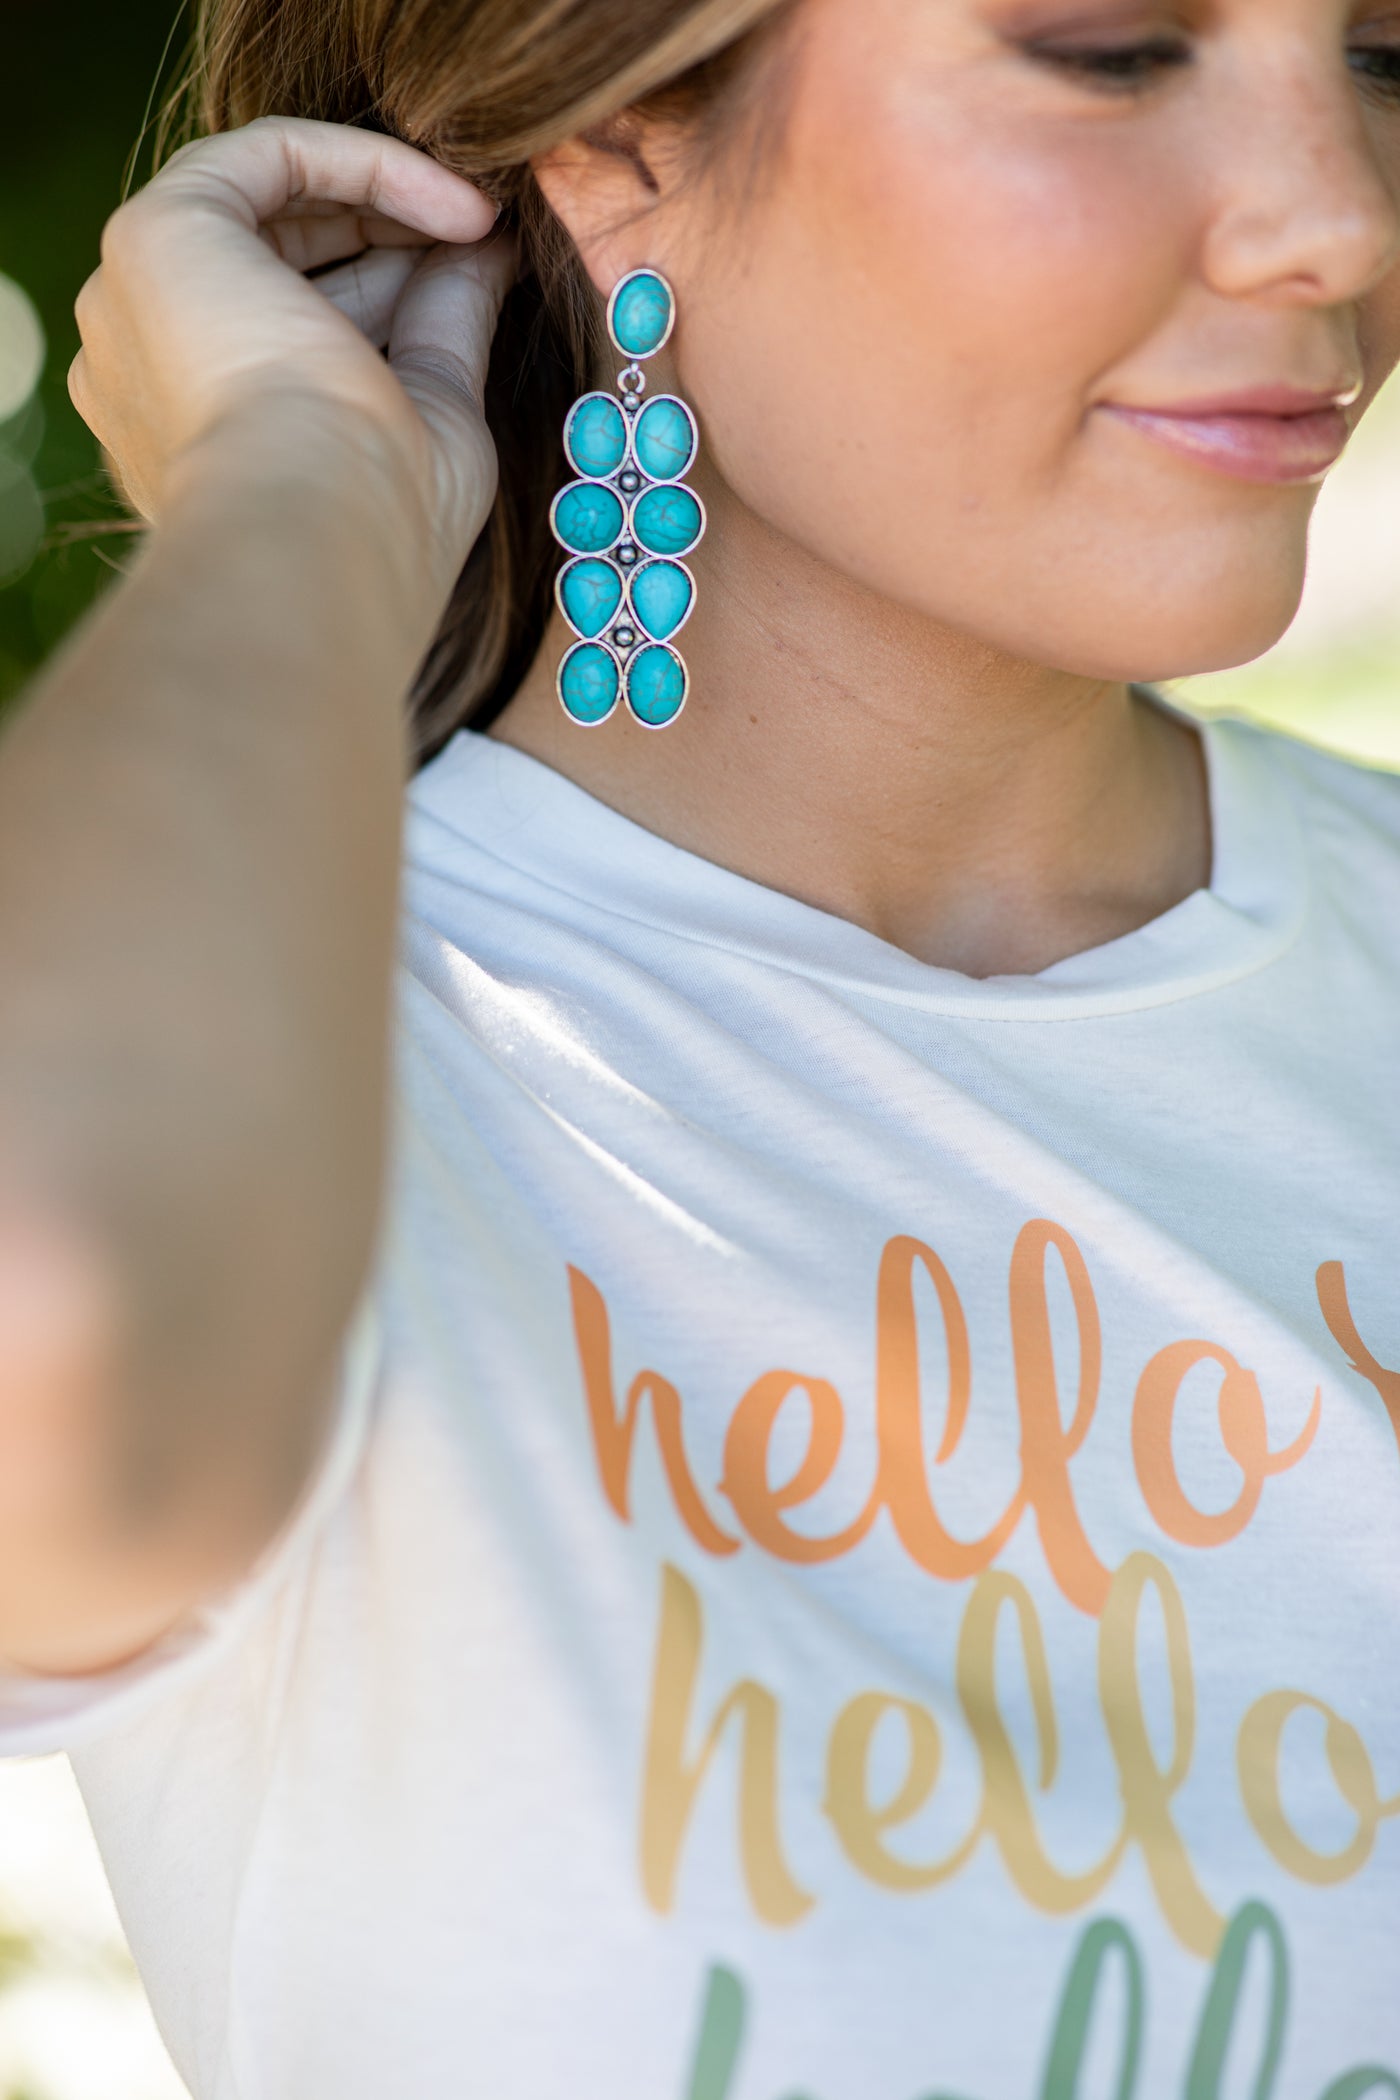 Silver and Turquoise Dangle Earrings